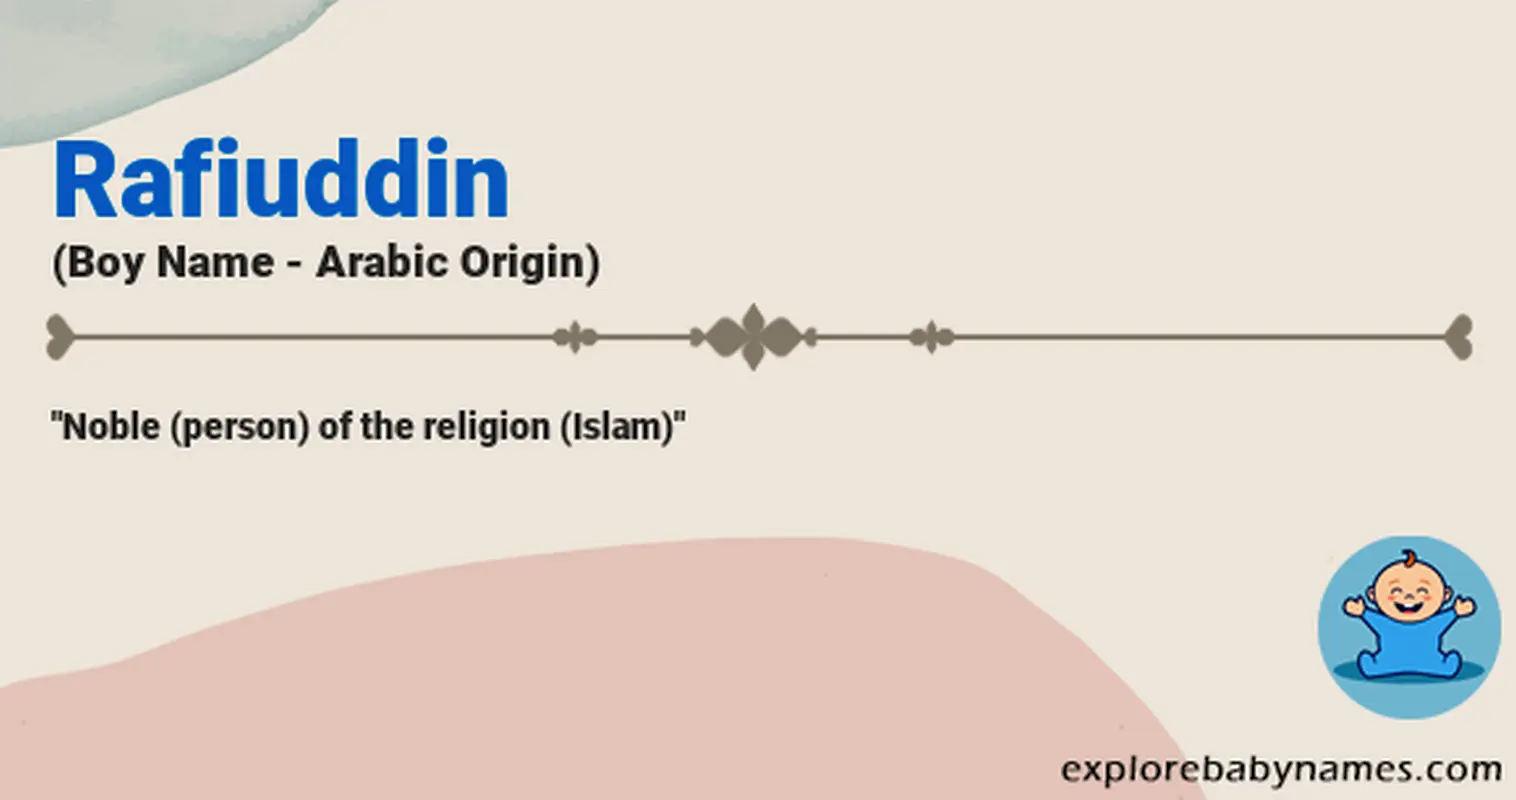 Meaning of Rafiuddin